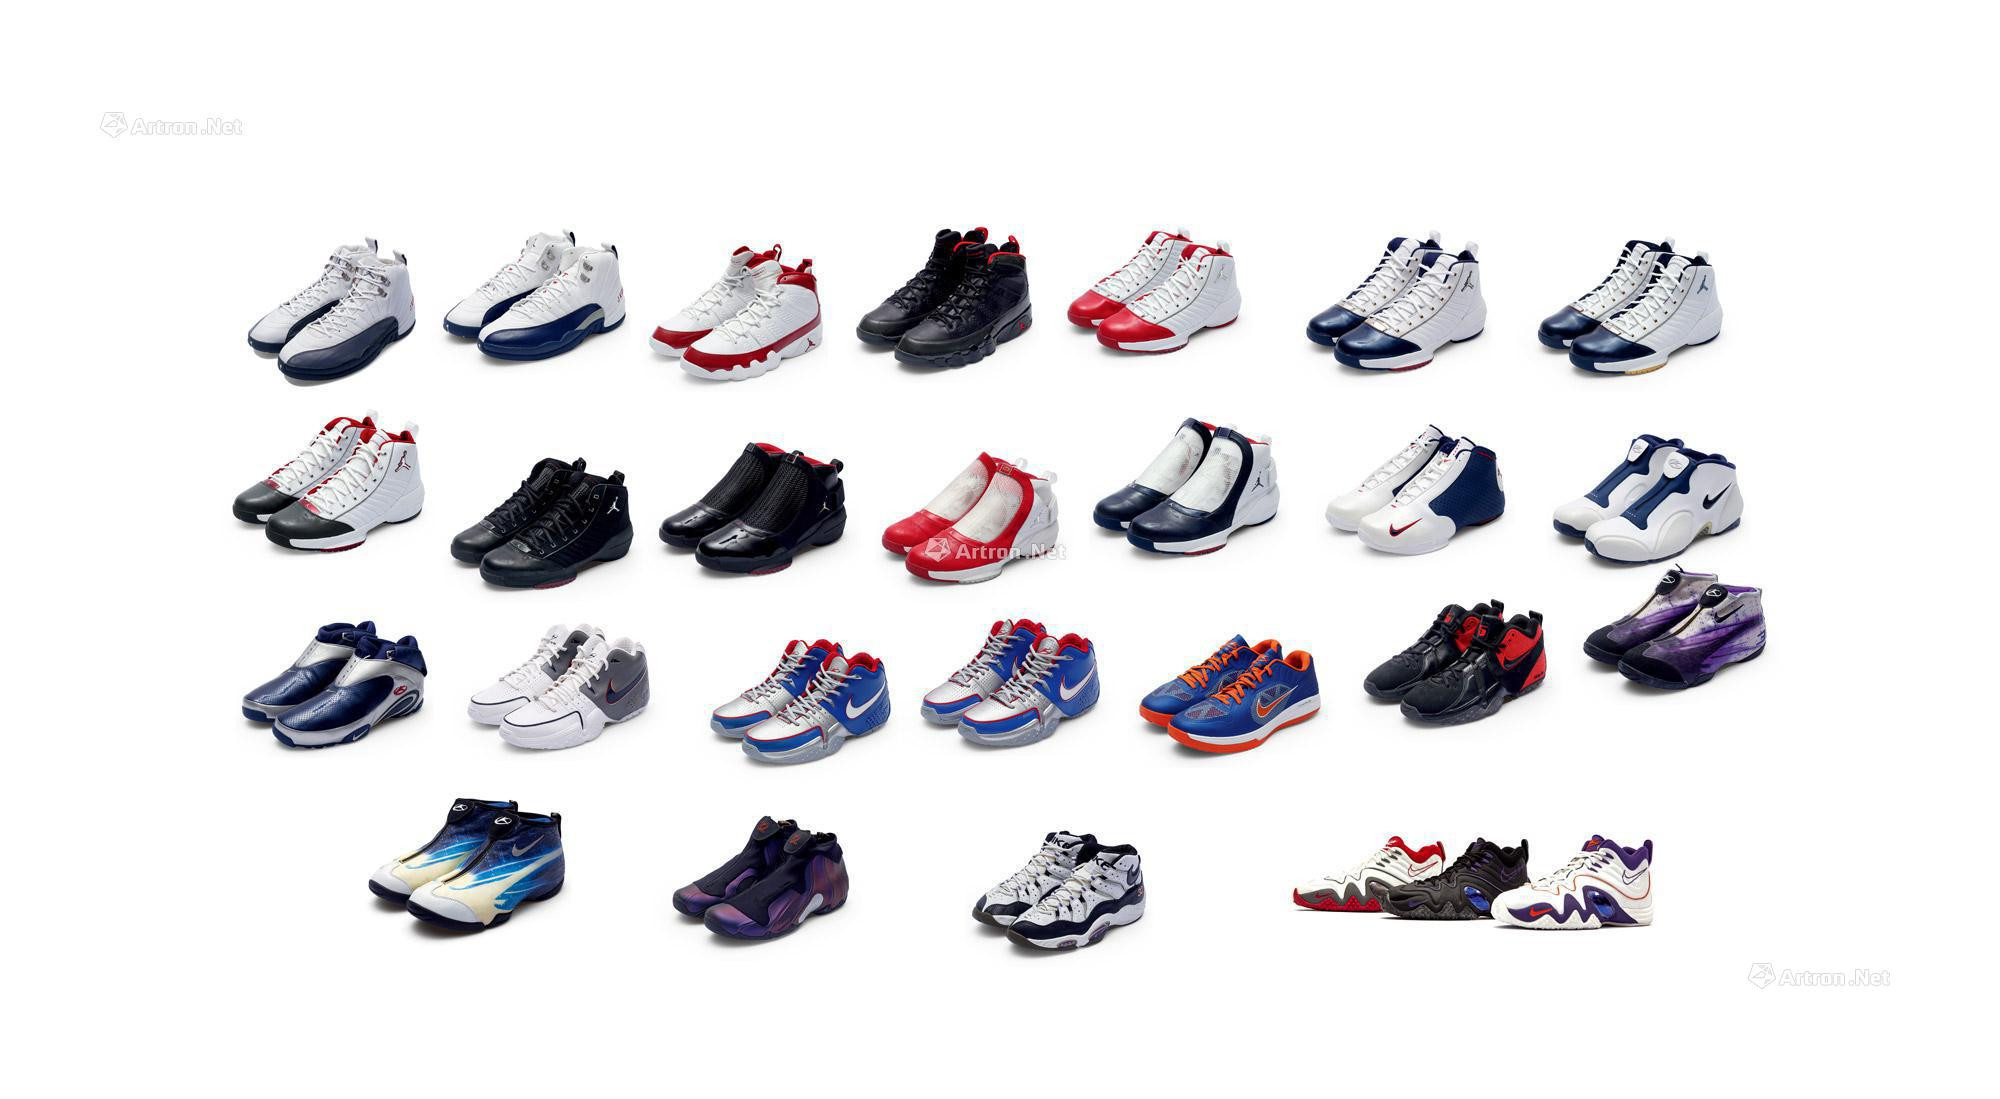 Jason Kidd Exclusive Sneaker Collection  28 Pairs of Player Exclusive Sneakers